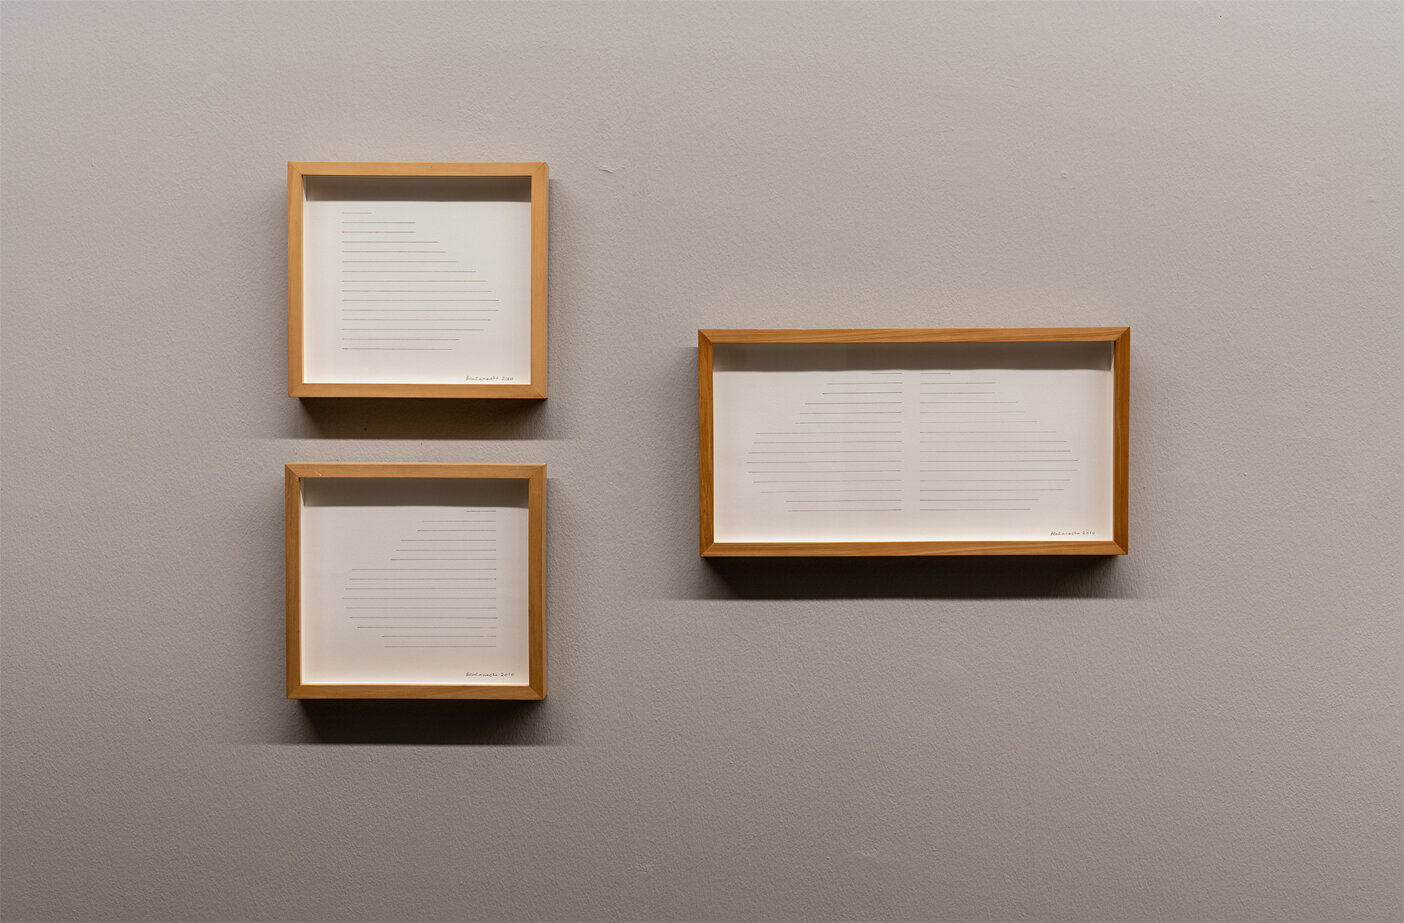  Bea CAMACHO (Clockwise)  Self-Portrait (Circumference of Right Hand at ½” Intervals); Self-Portrait (Circumference of Both Hands at ½” Intervals); Self-Portrait (Circumference of Left Hand at ½” Intervals)  Installation view 